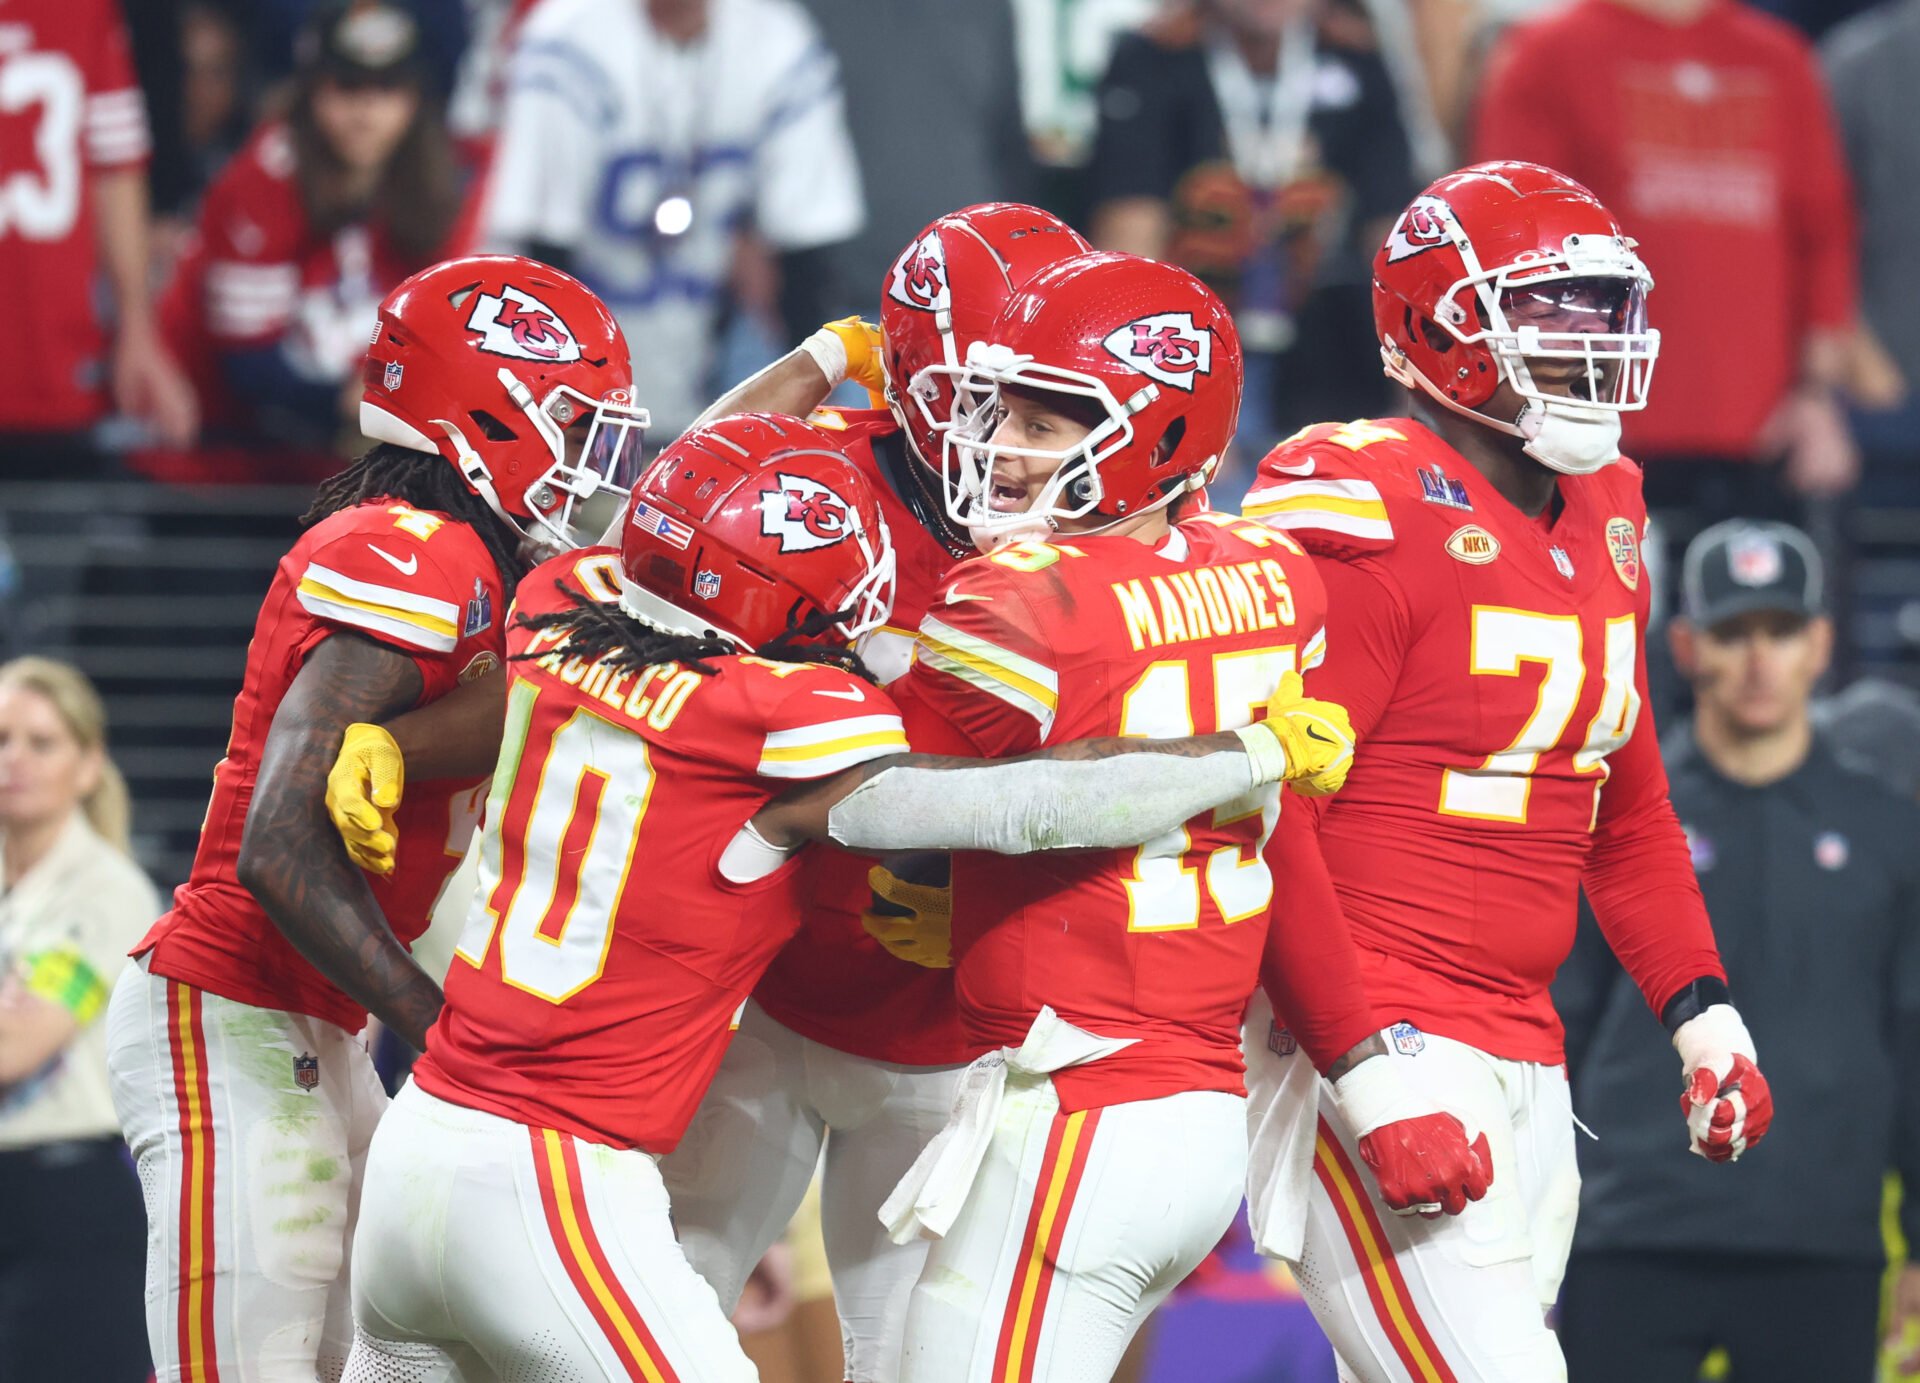 Kansas City Chiefs quarterback Patrick Mahomes (15) celebrates with teammates after a touchown against the San Francisco 49ers in the second half in Super Bowl LVIII at Allegiant Stadium.